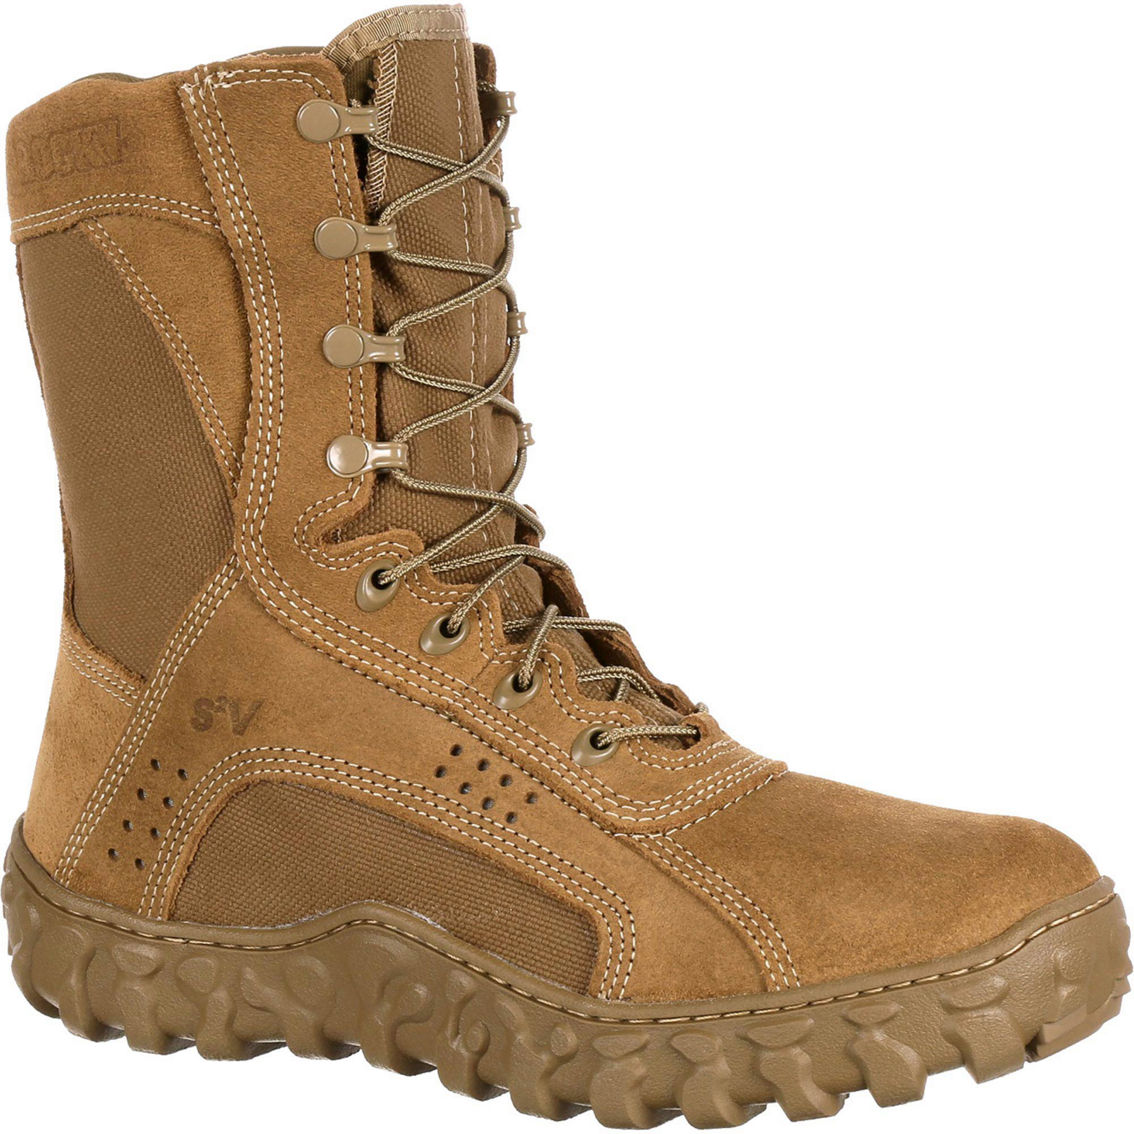 Rocky Coyote Rkc050 Tactical Military Boots | Men's Shoes | Shoes ...